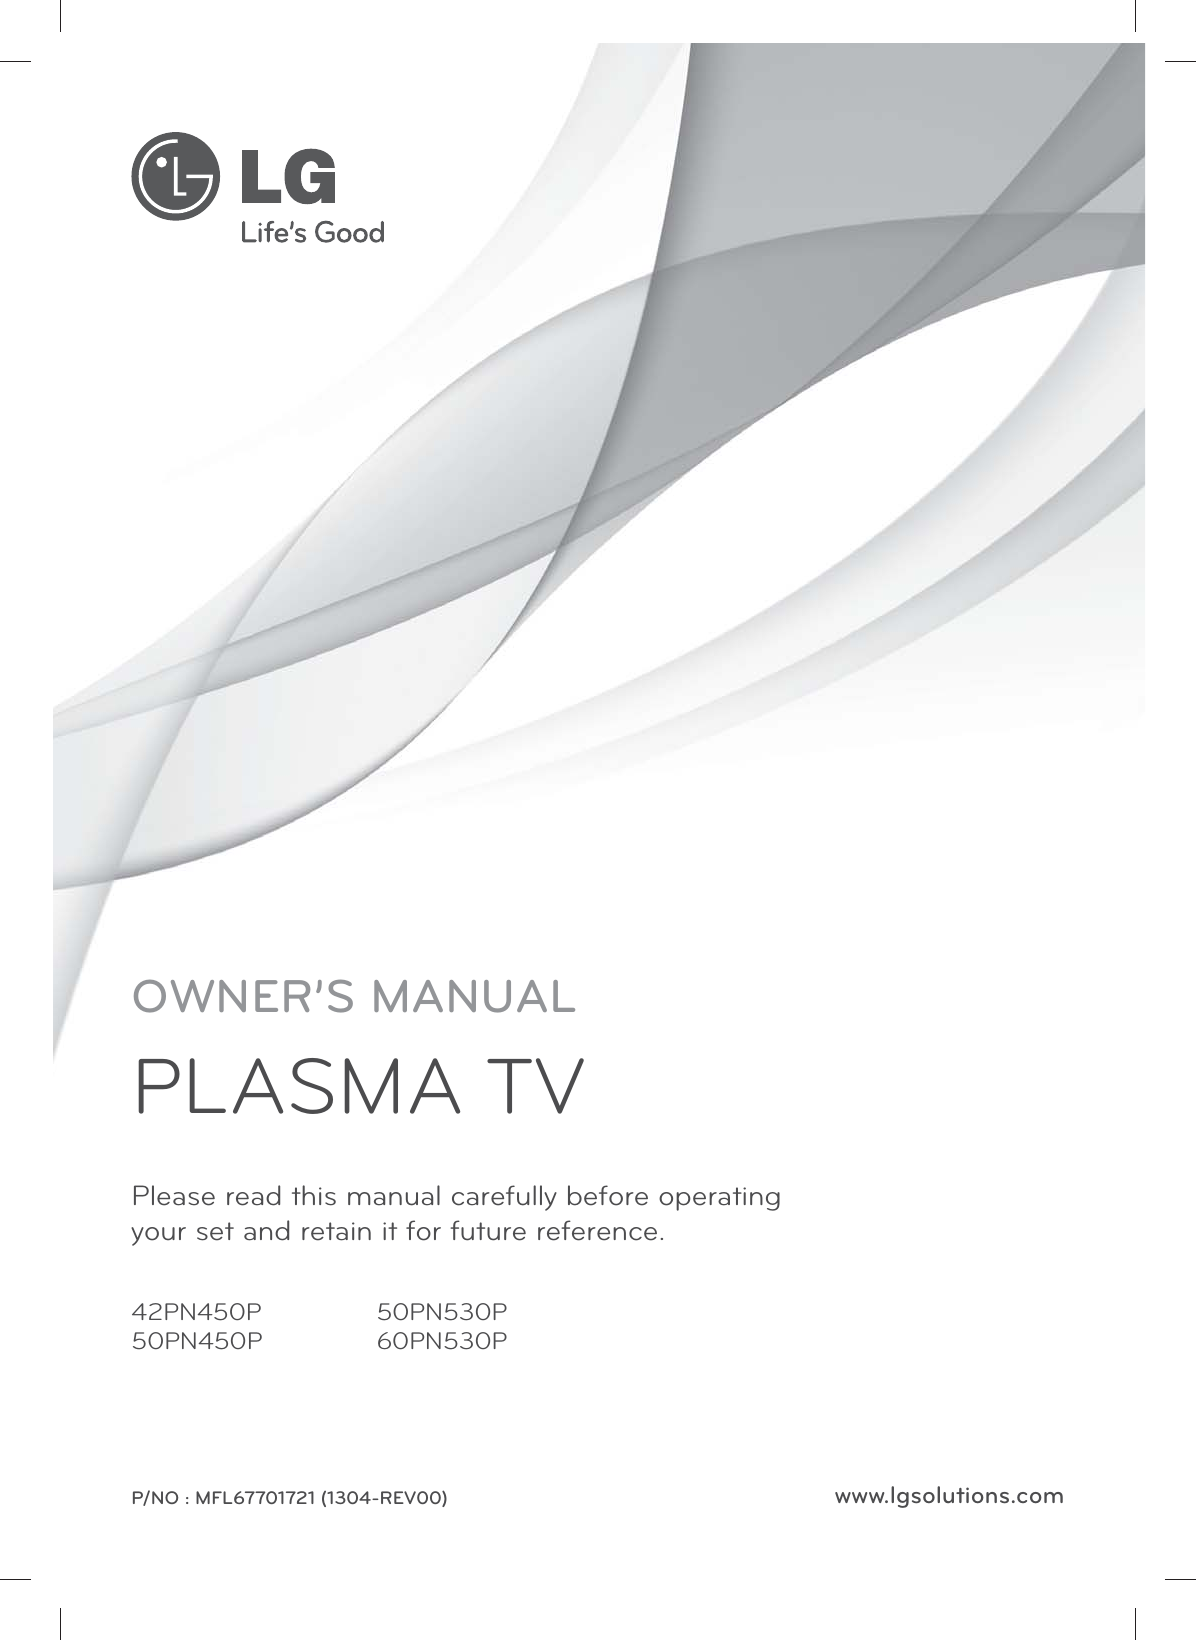 www.lgsolutions.comPlease read this manual carefully before operating your set and retain it for future reference.P/NO : MFL67701721 (1304-REV00)OWNER’S MANUALPLASMA TV42PN450P50PN450P50PN530P60PN530P